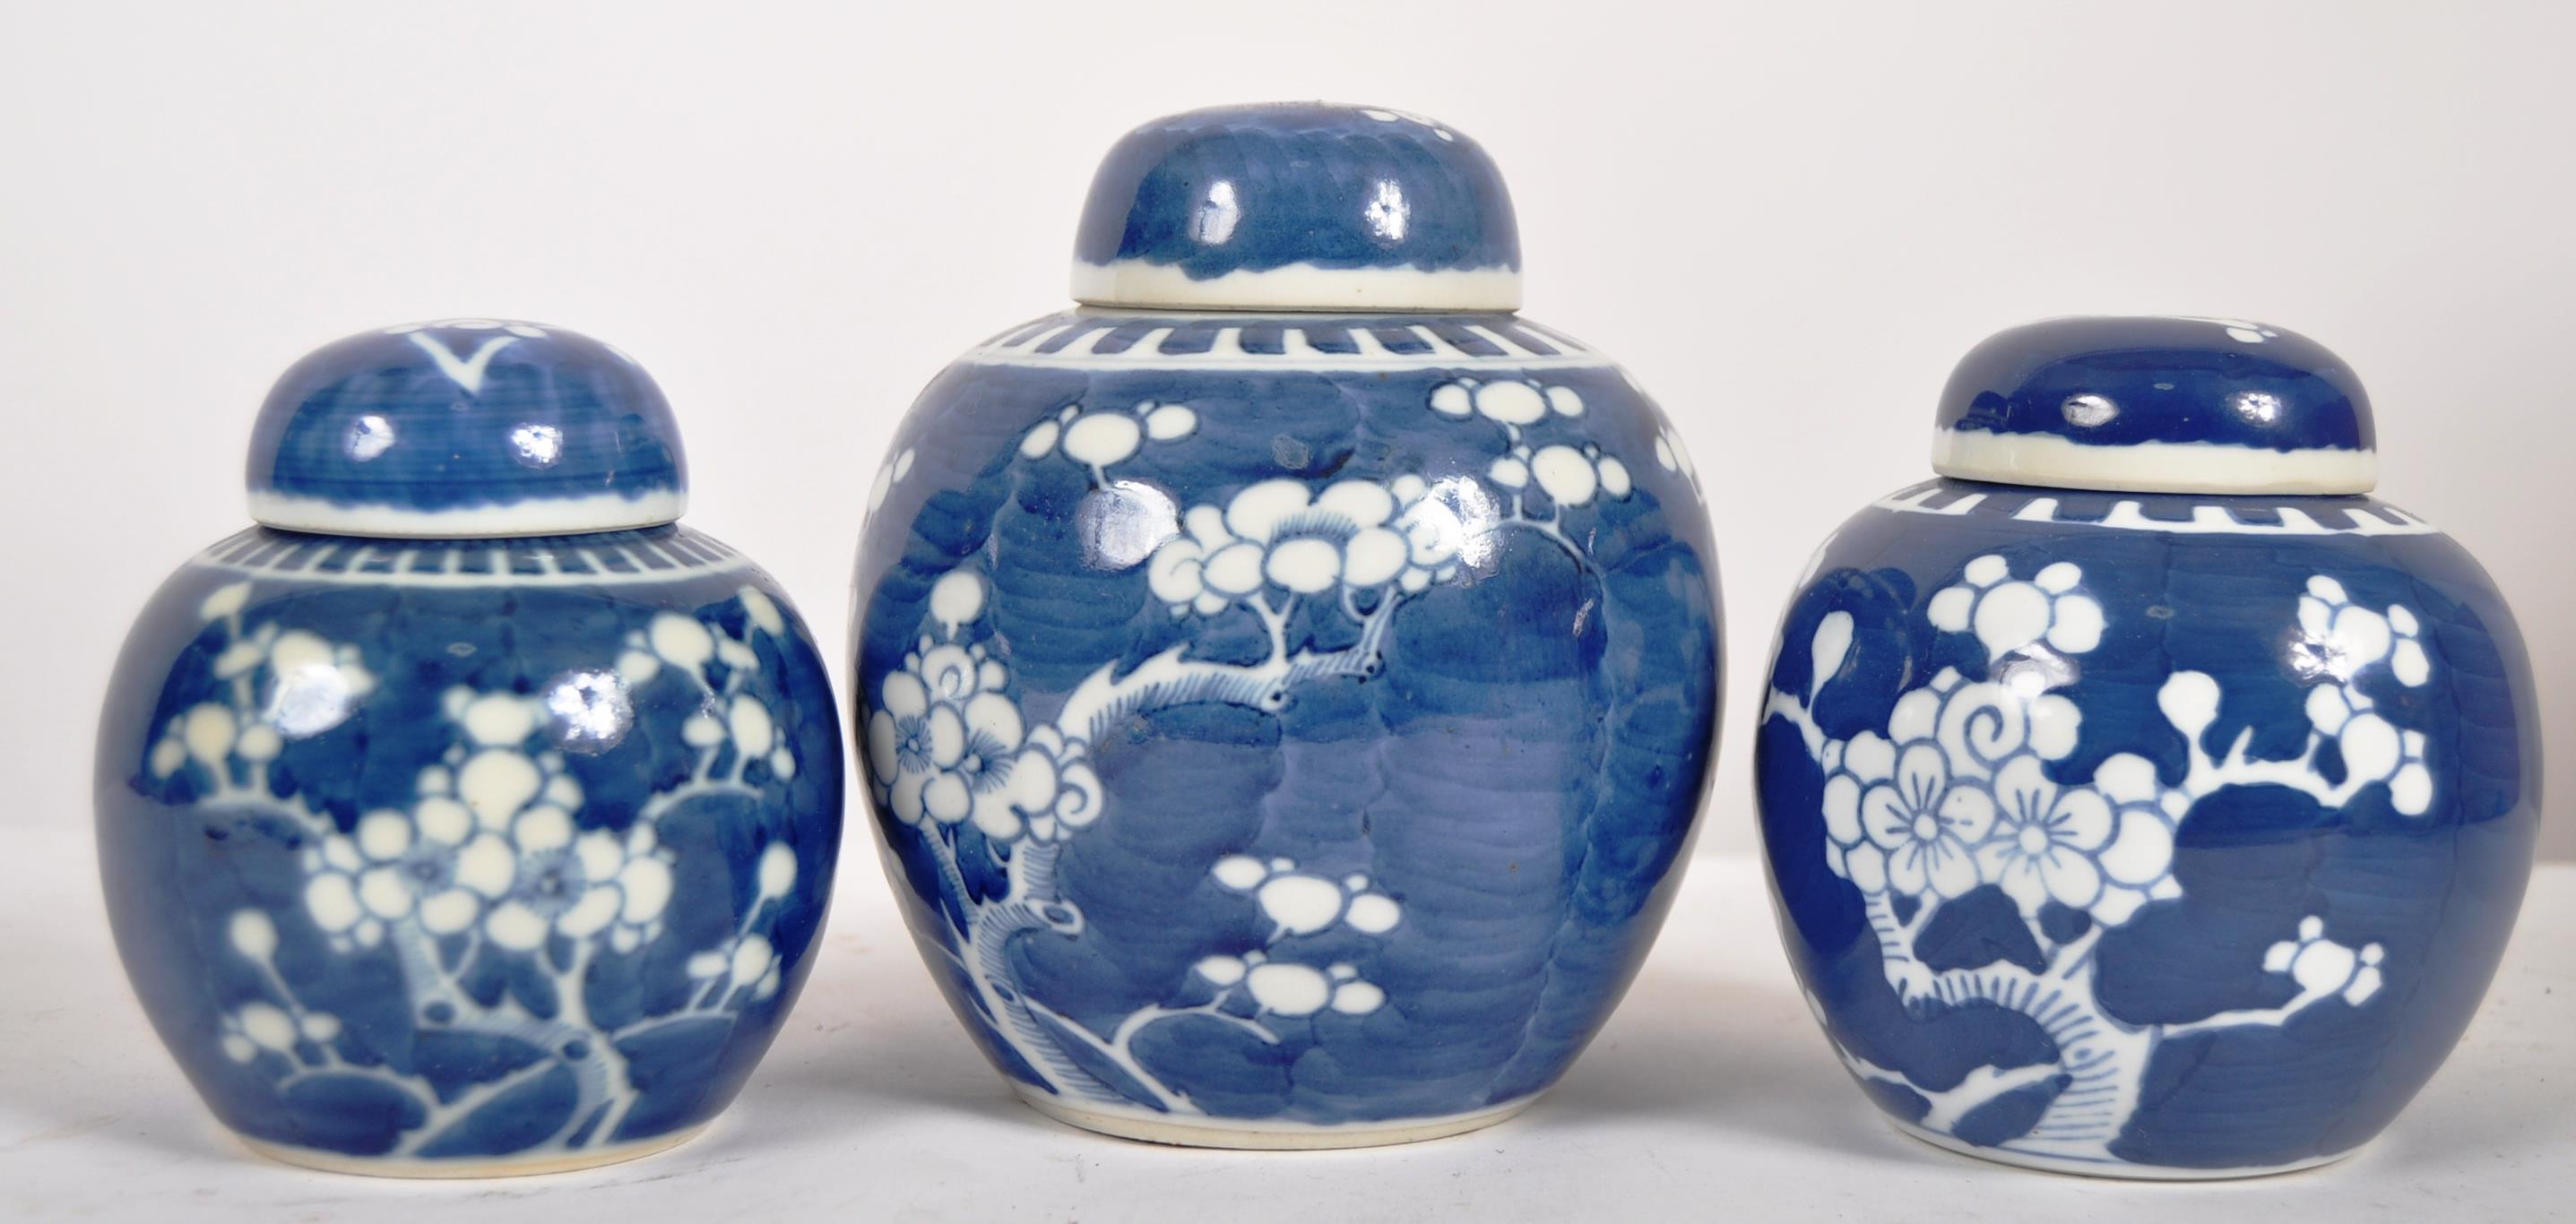 TRIO OF EARLY 20TH CENTURY CHINESE PRUNUS GINGER JARS - Image 3 of 5